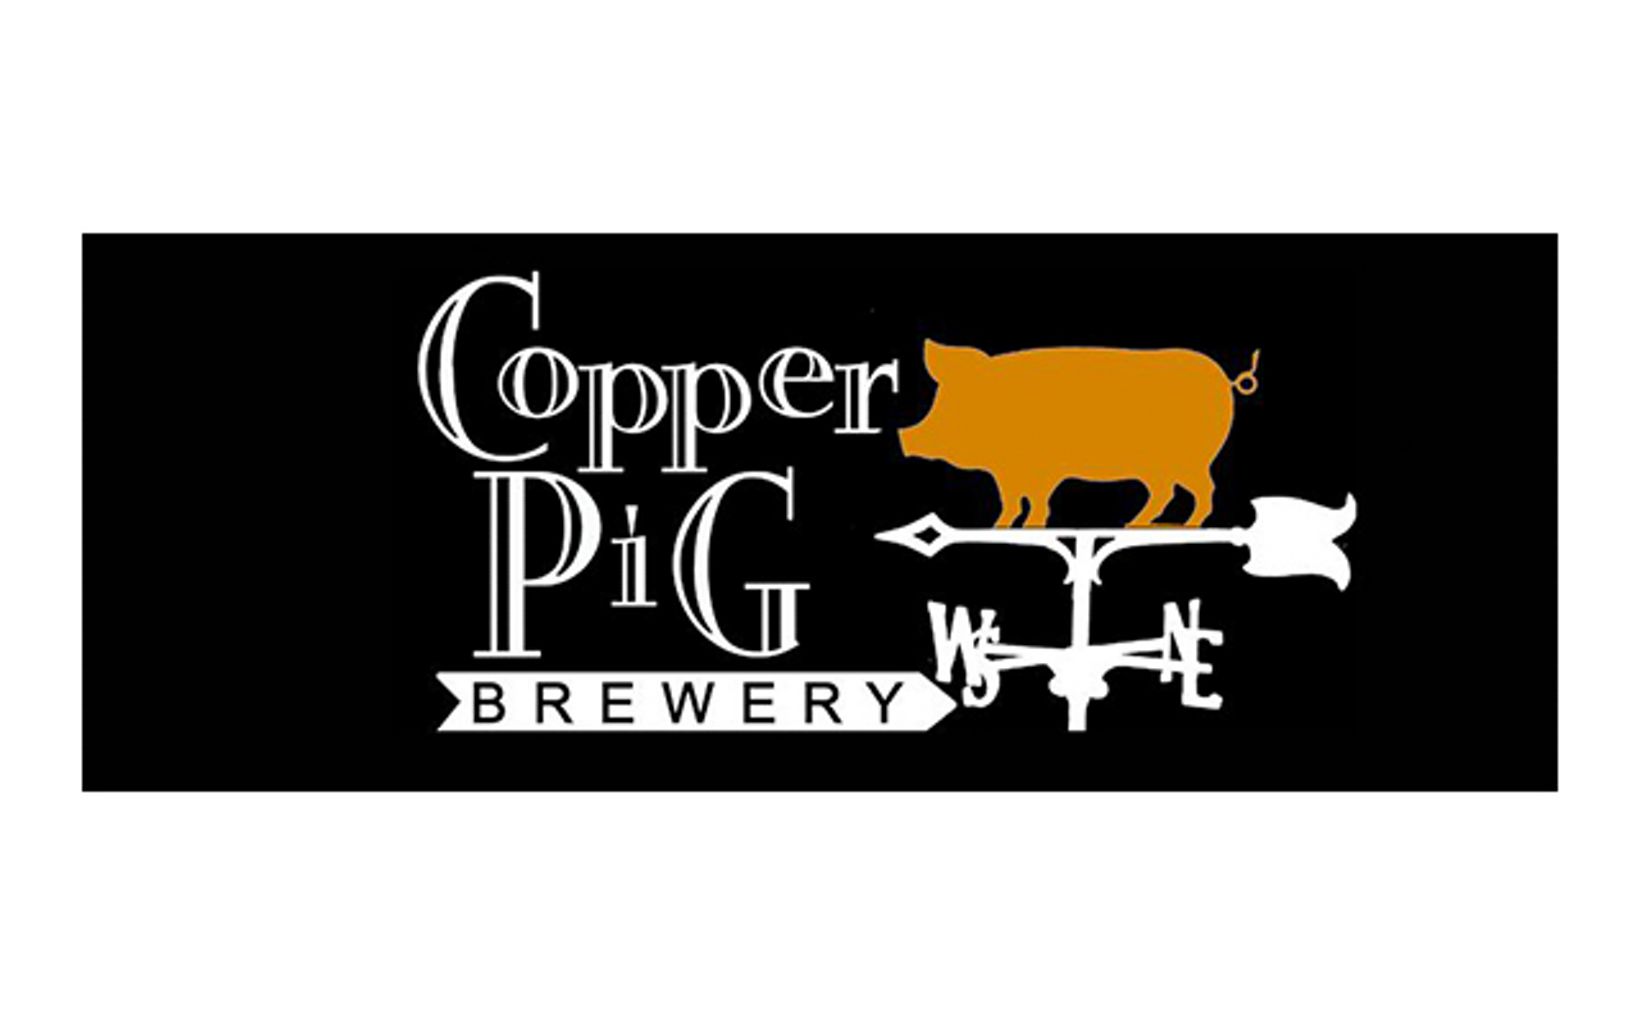 The Copper Pig Brewery Lancaster, New Hampshire 